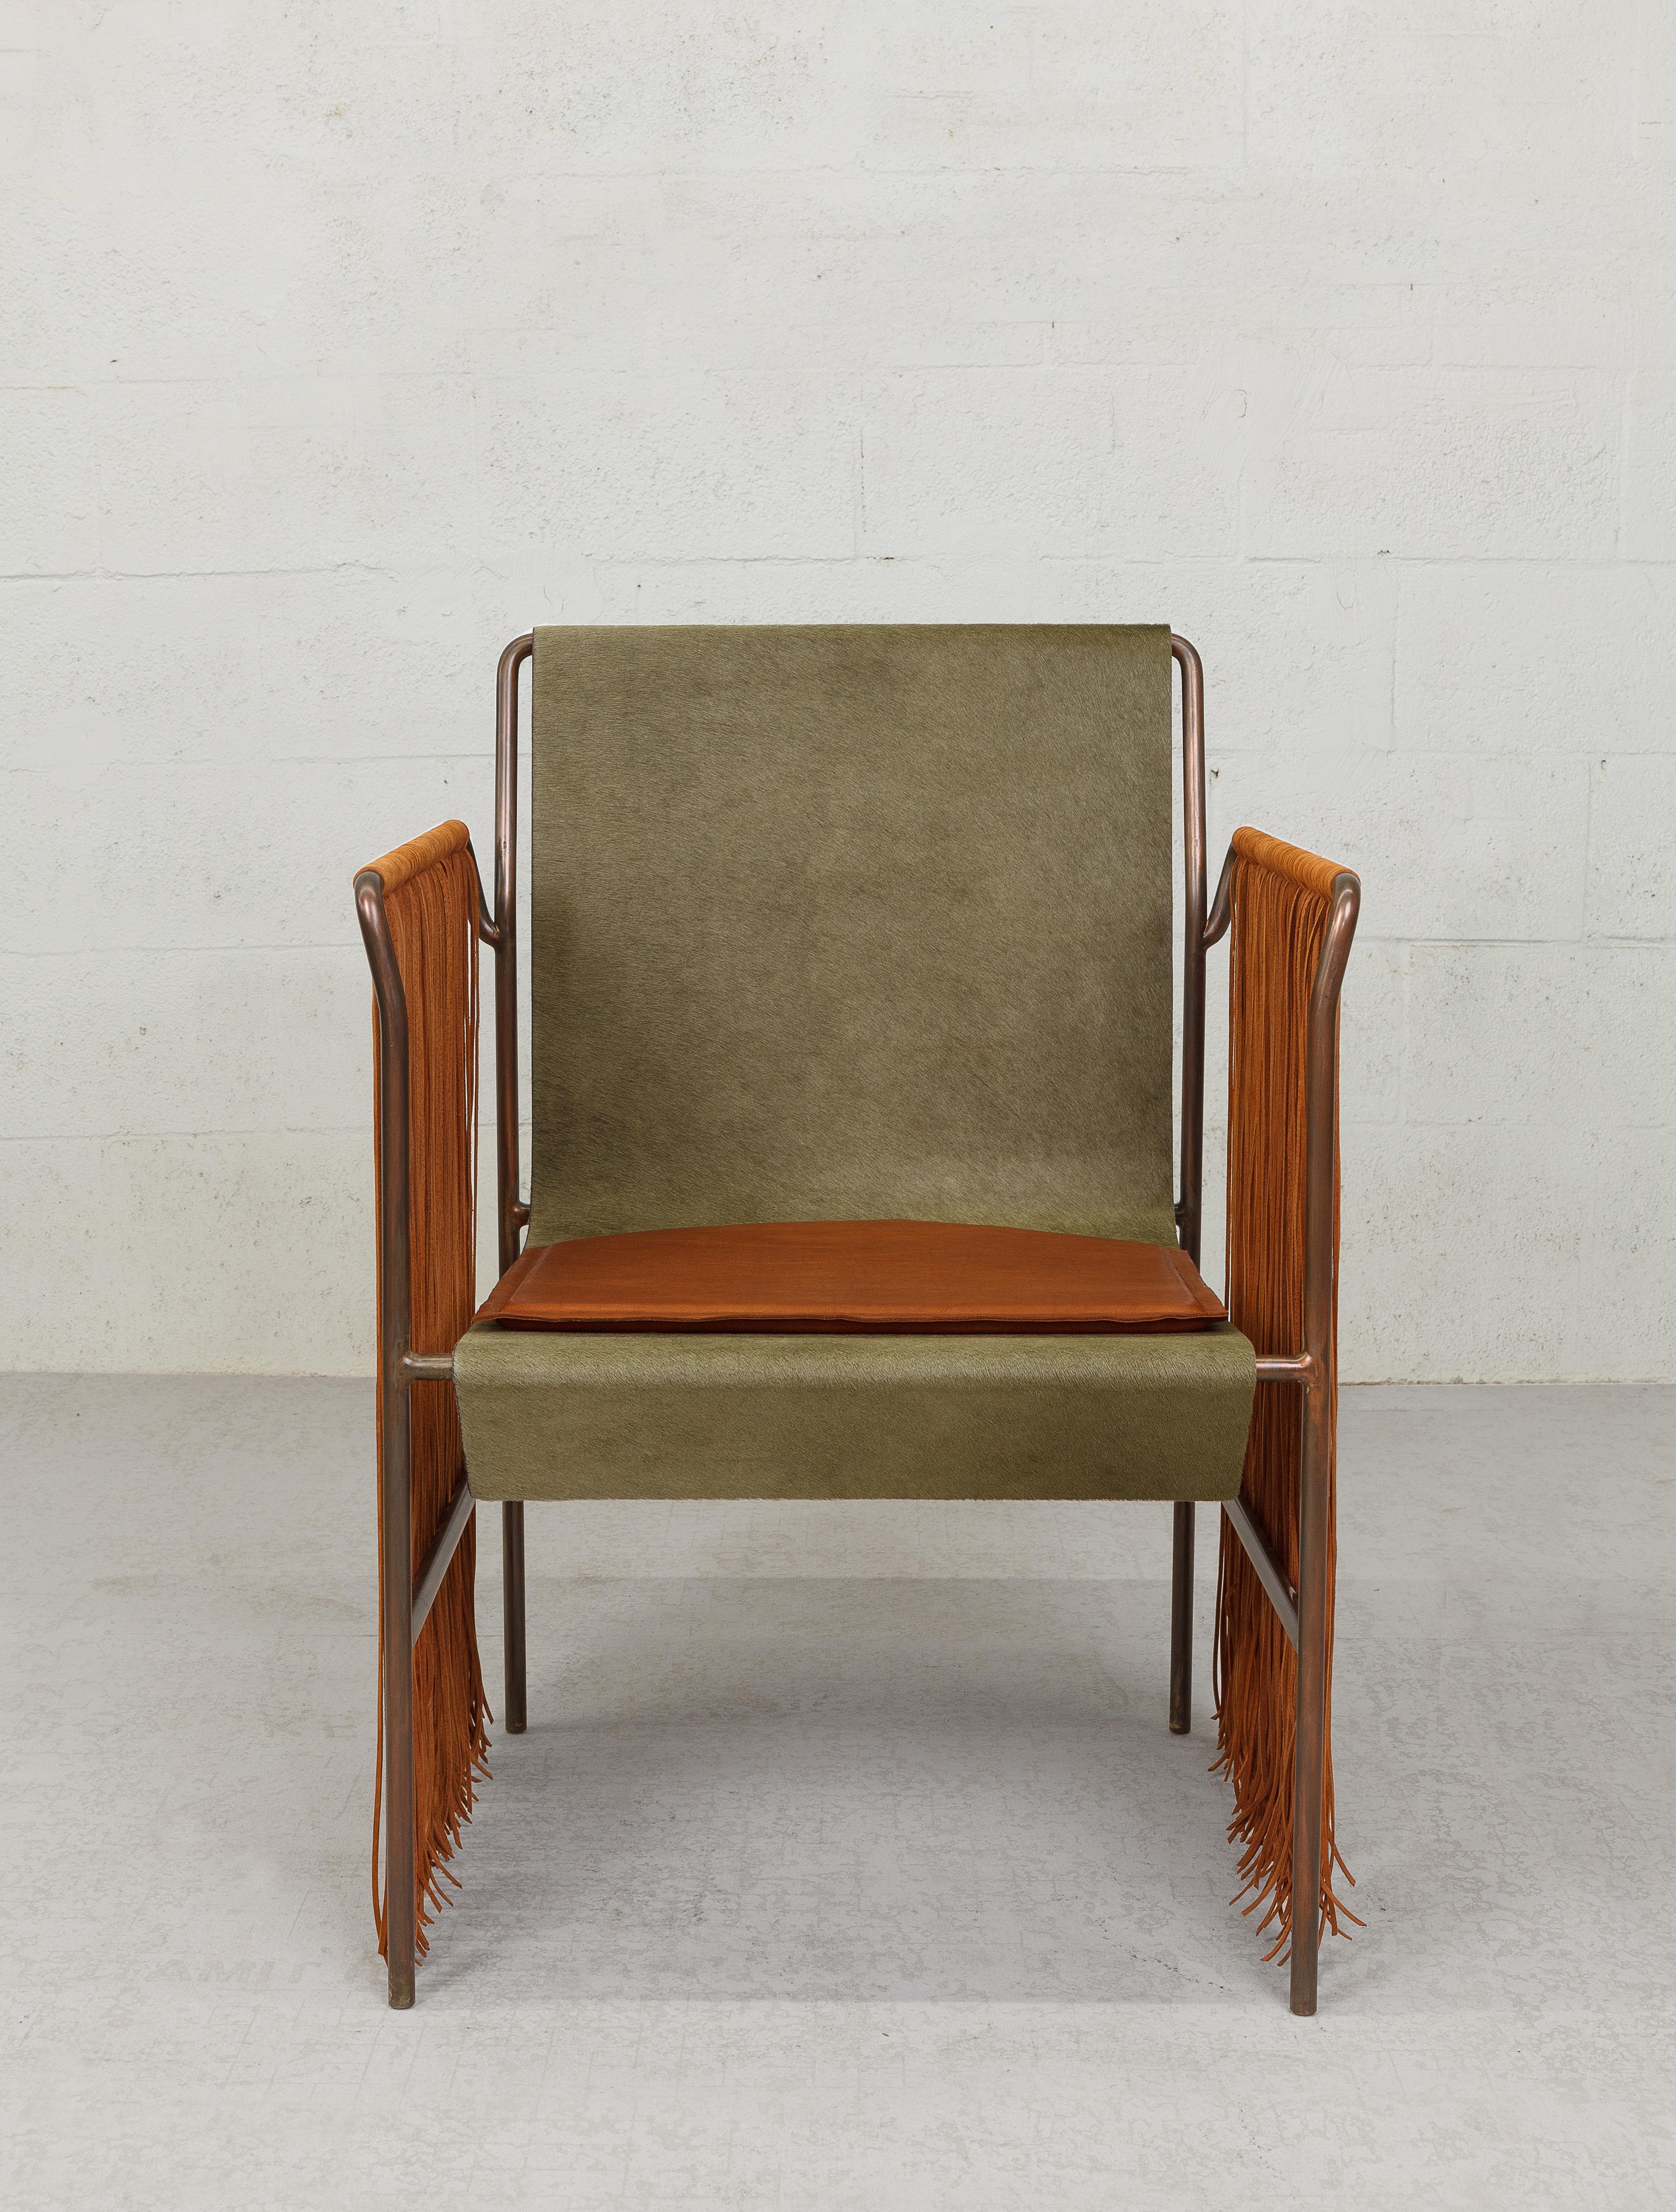 Contemporary Tribal Arm Chair in Patinated Steel and Leather by Vivian Carbonell For Sale 2